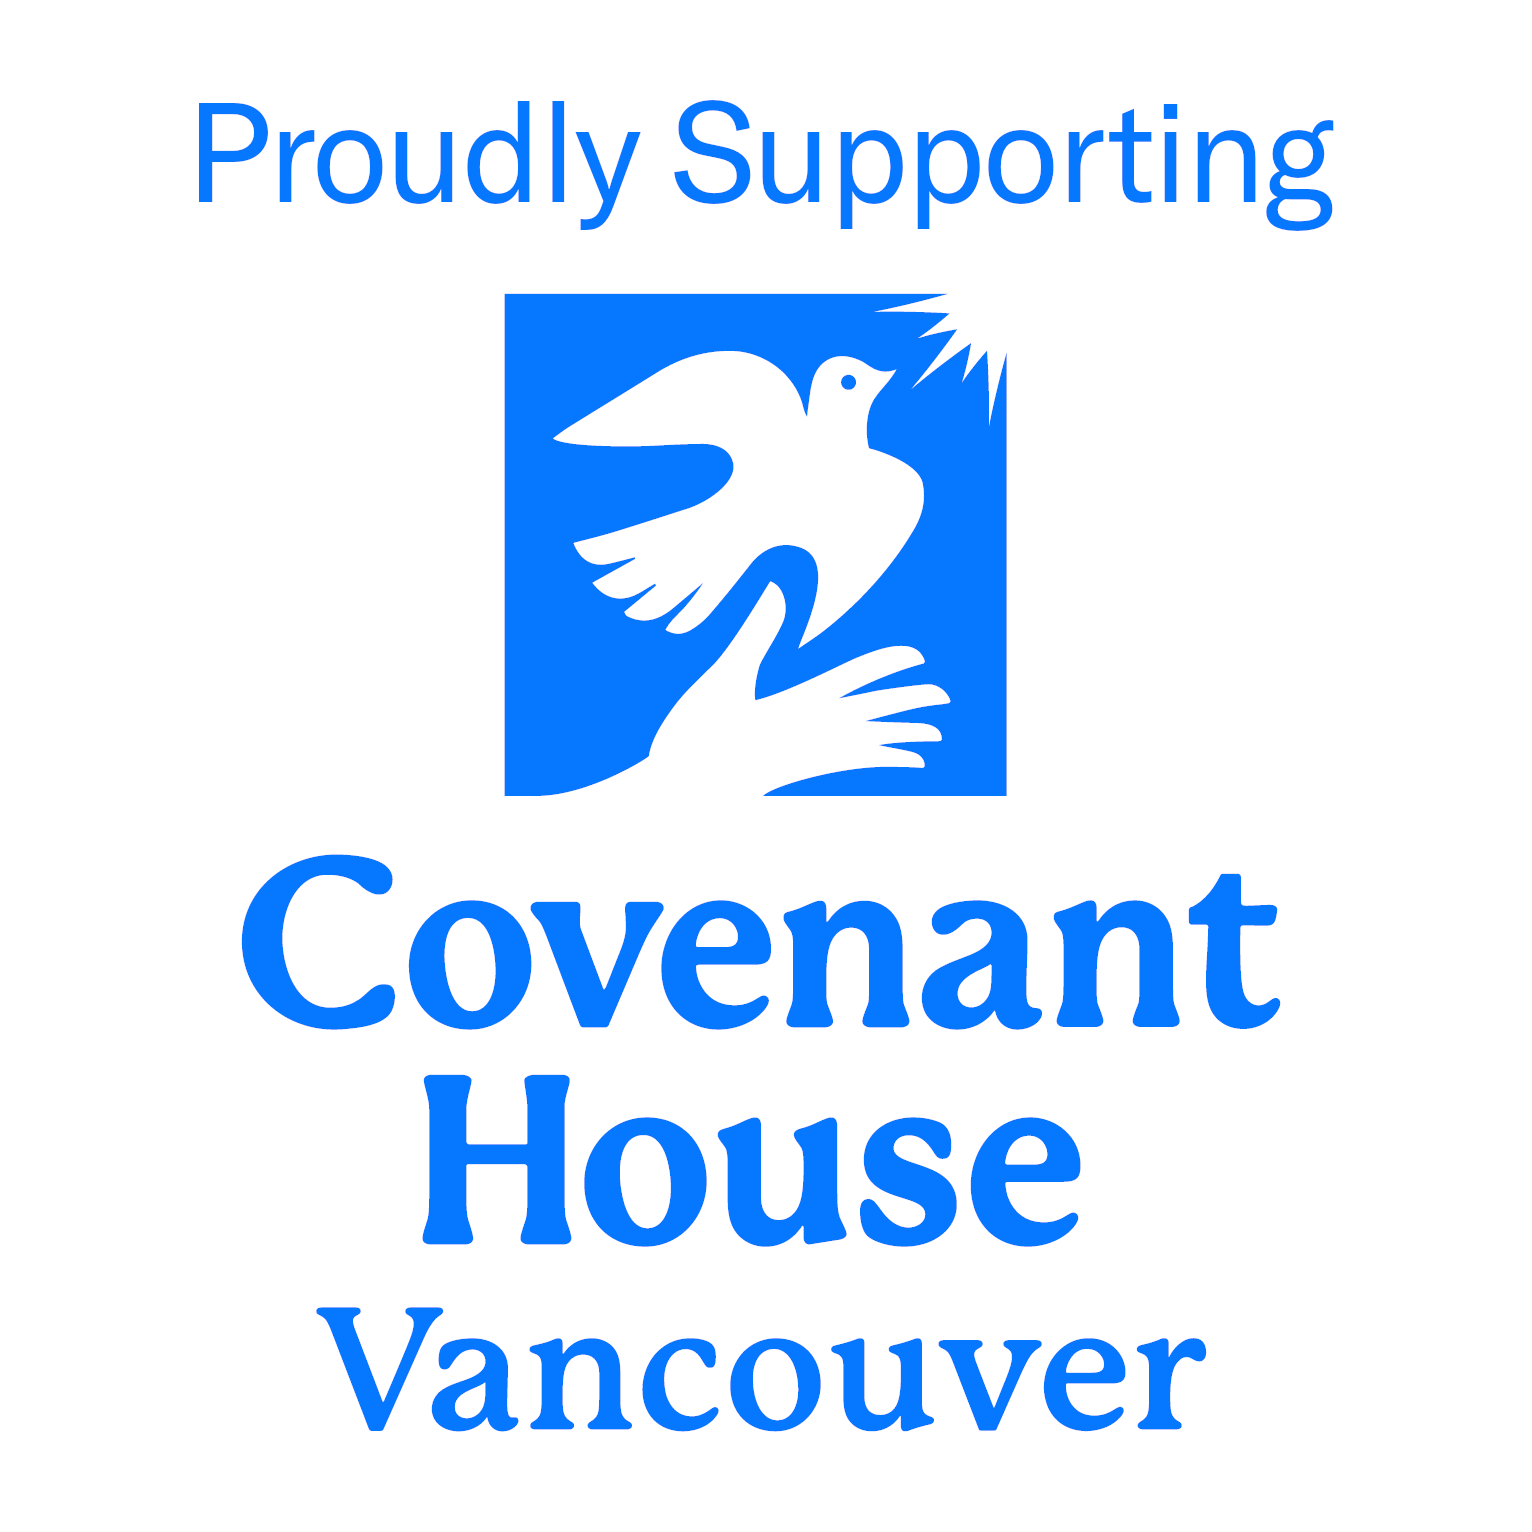 Proudly-Supporting-Covenant-house-vancouver-logo-BlueOnWhite